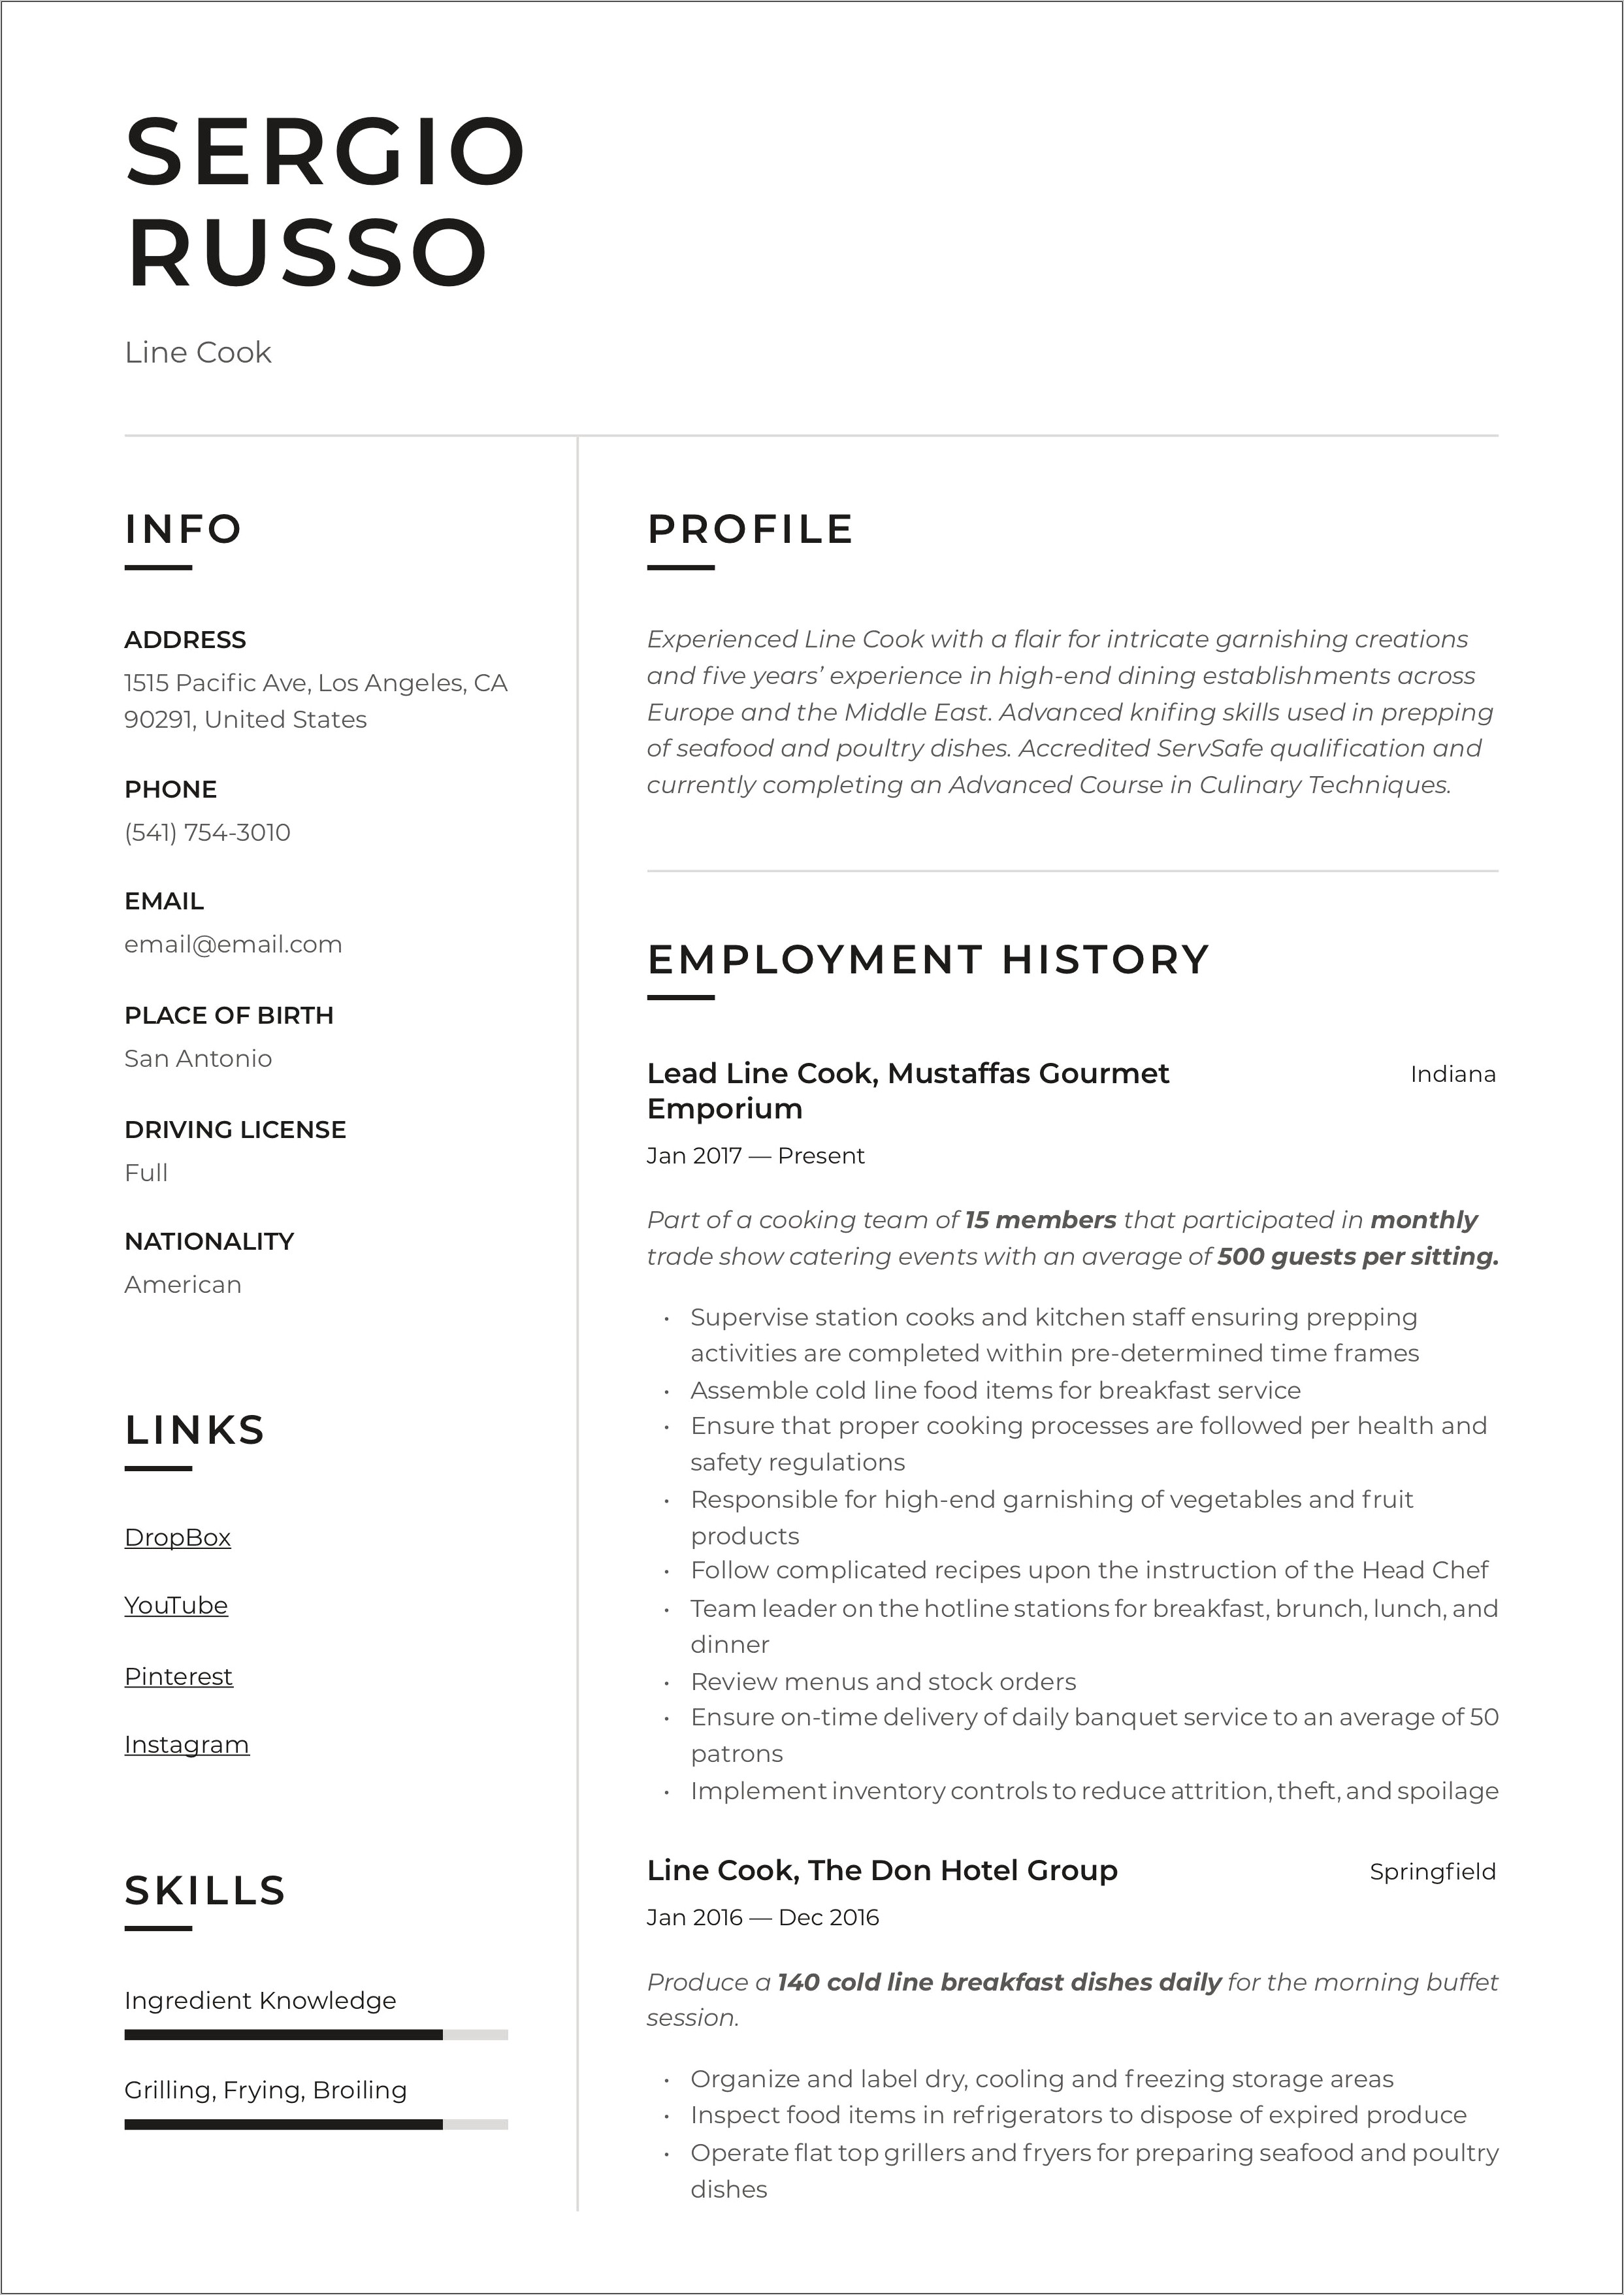 Doing Inventory In Job Resume For Line Cook